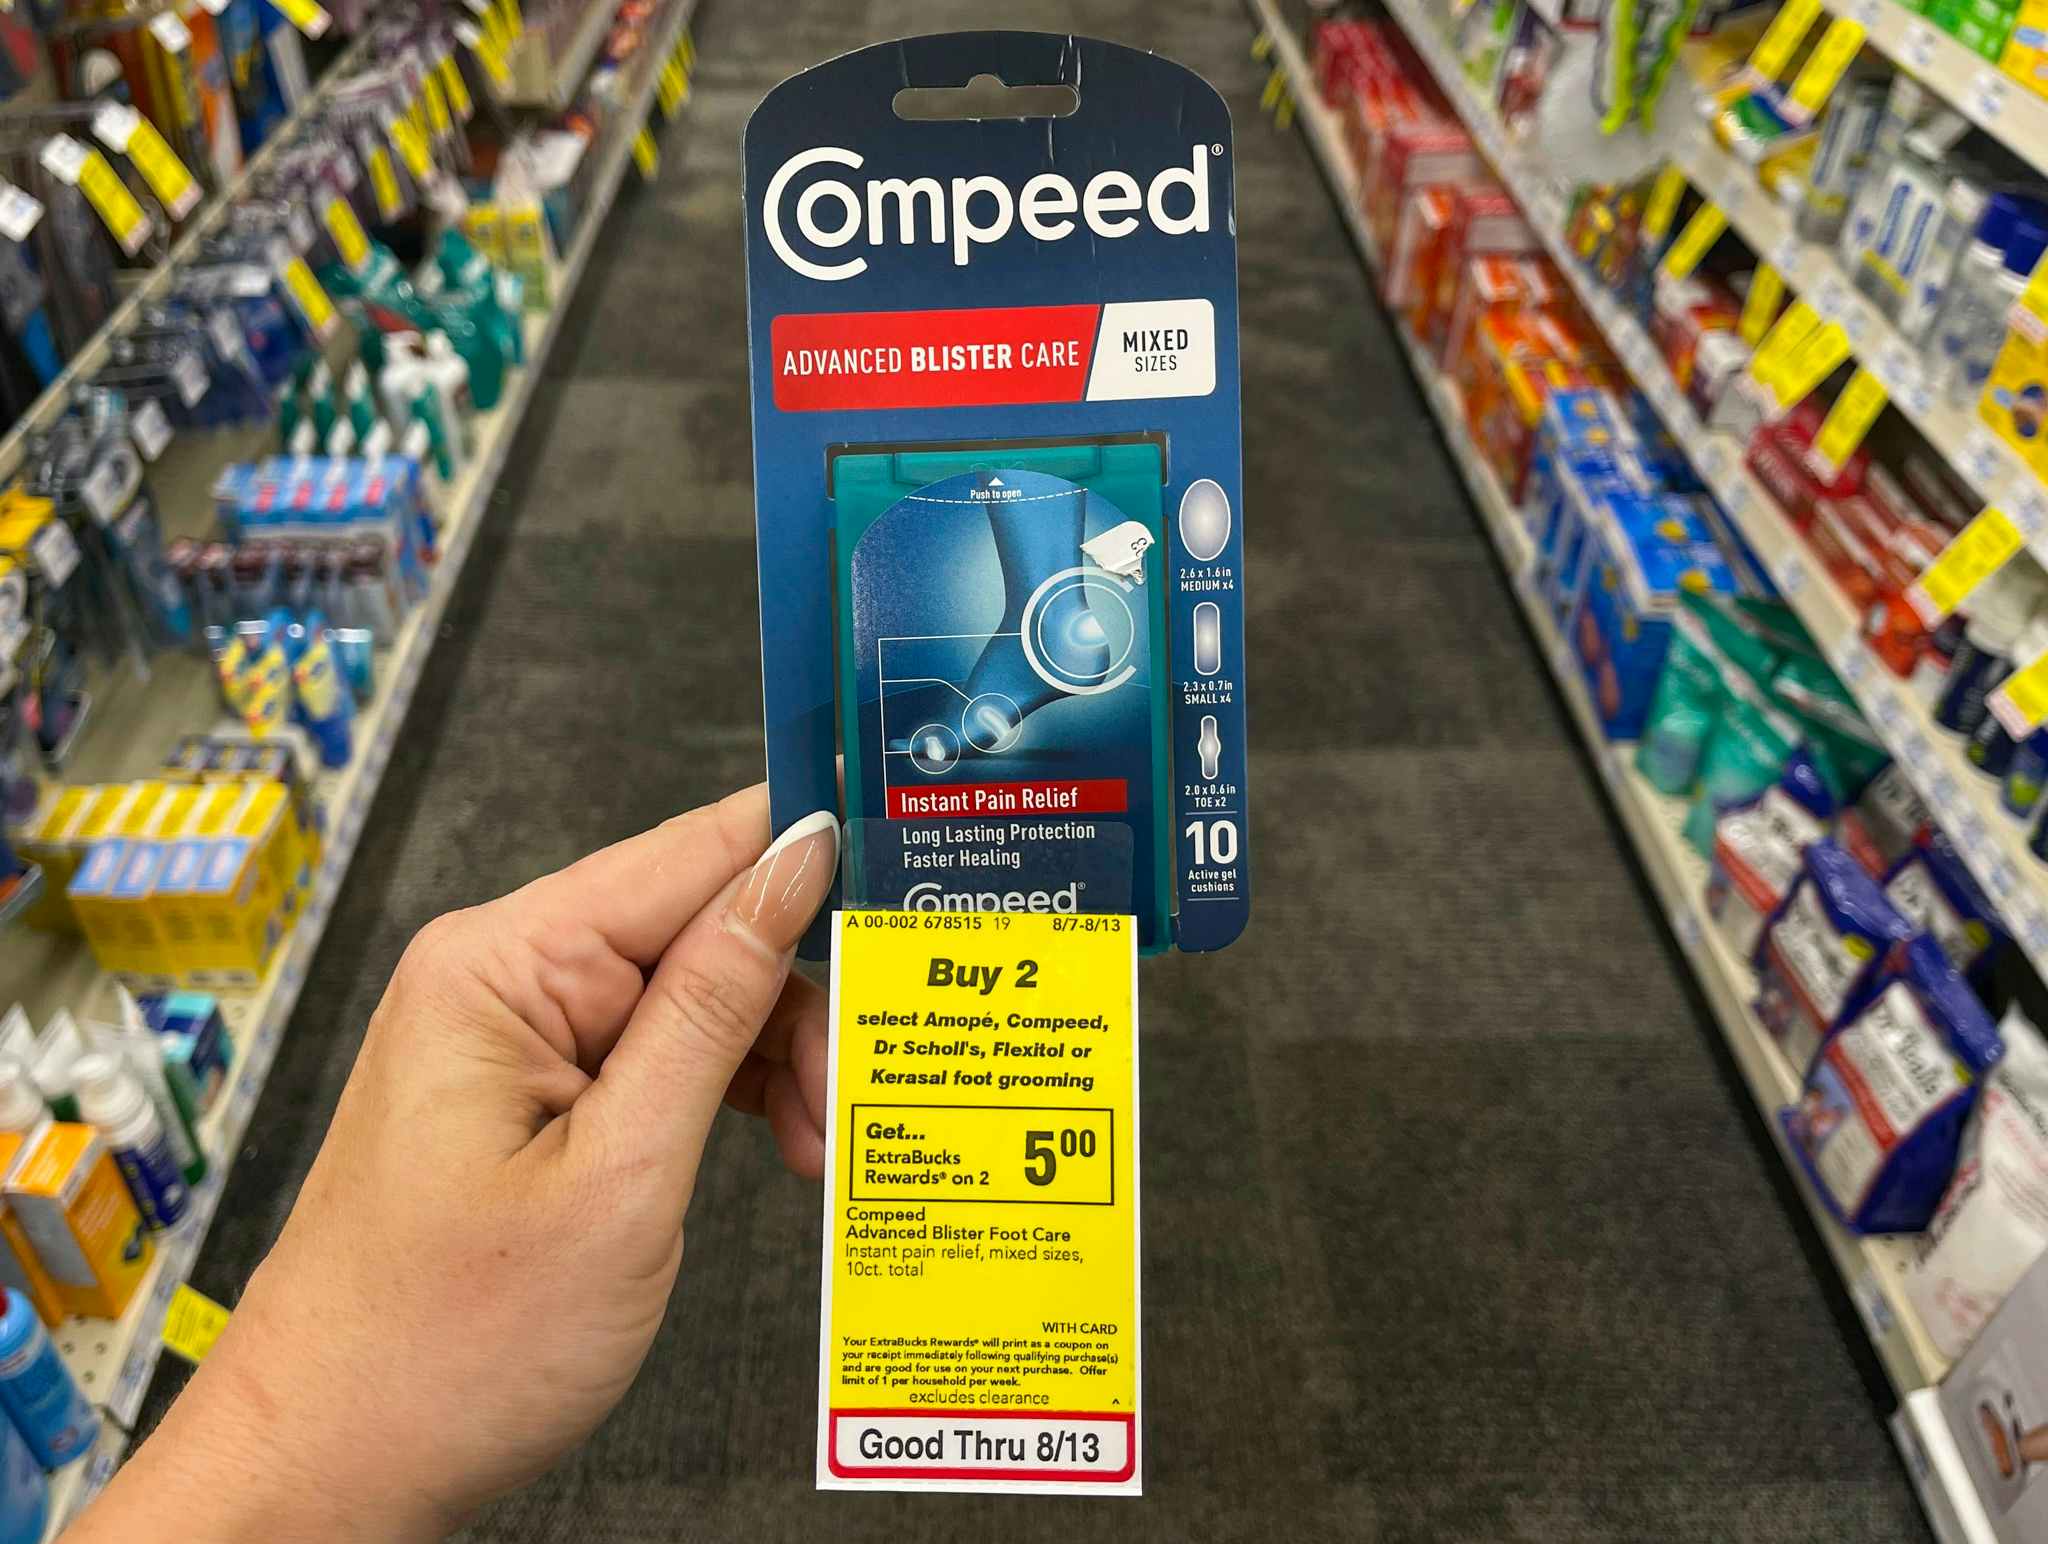 hand holding compeed package with extrabucks promotion tag